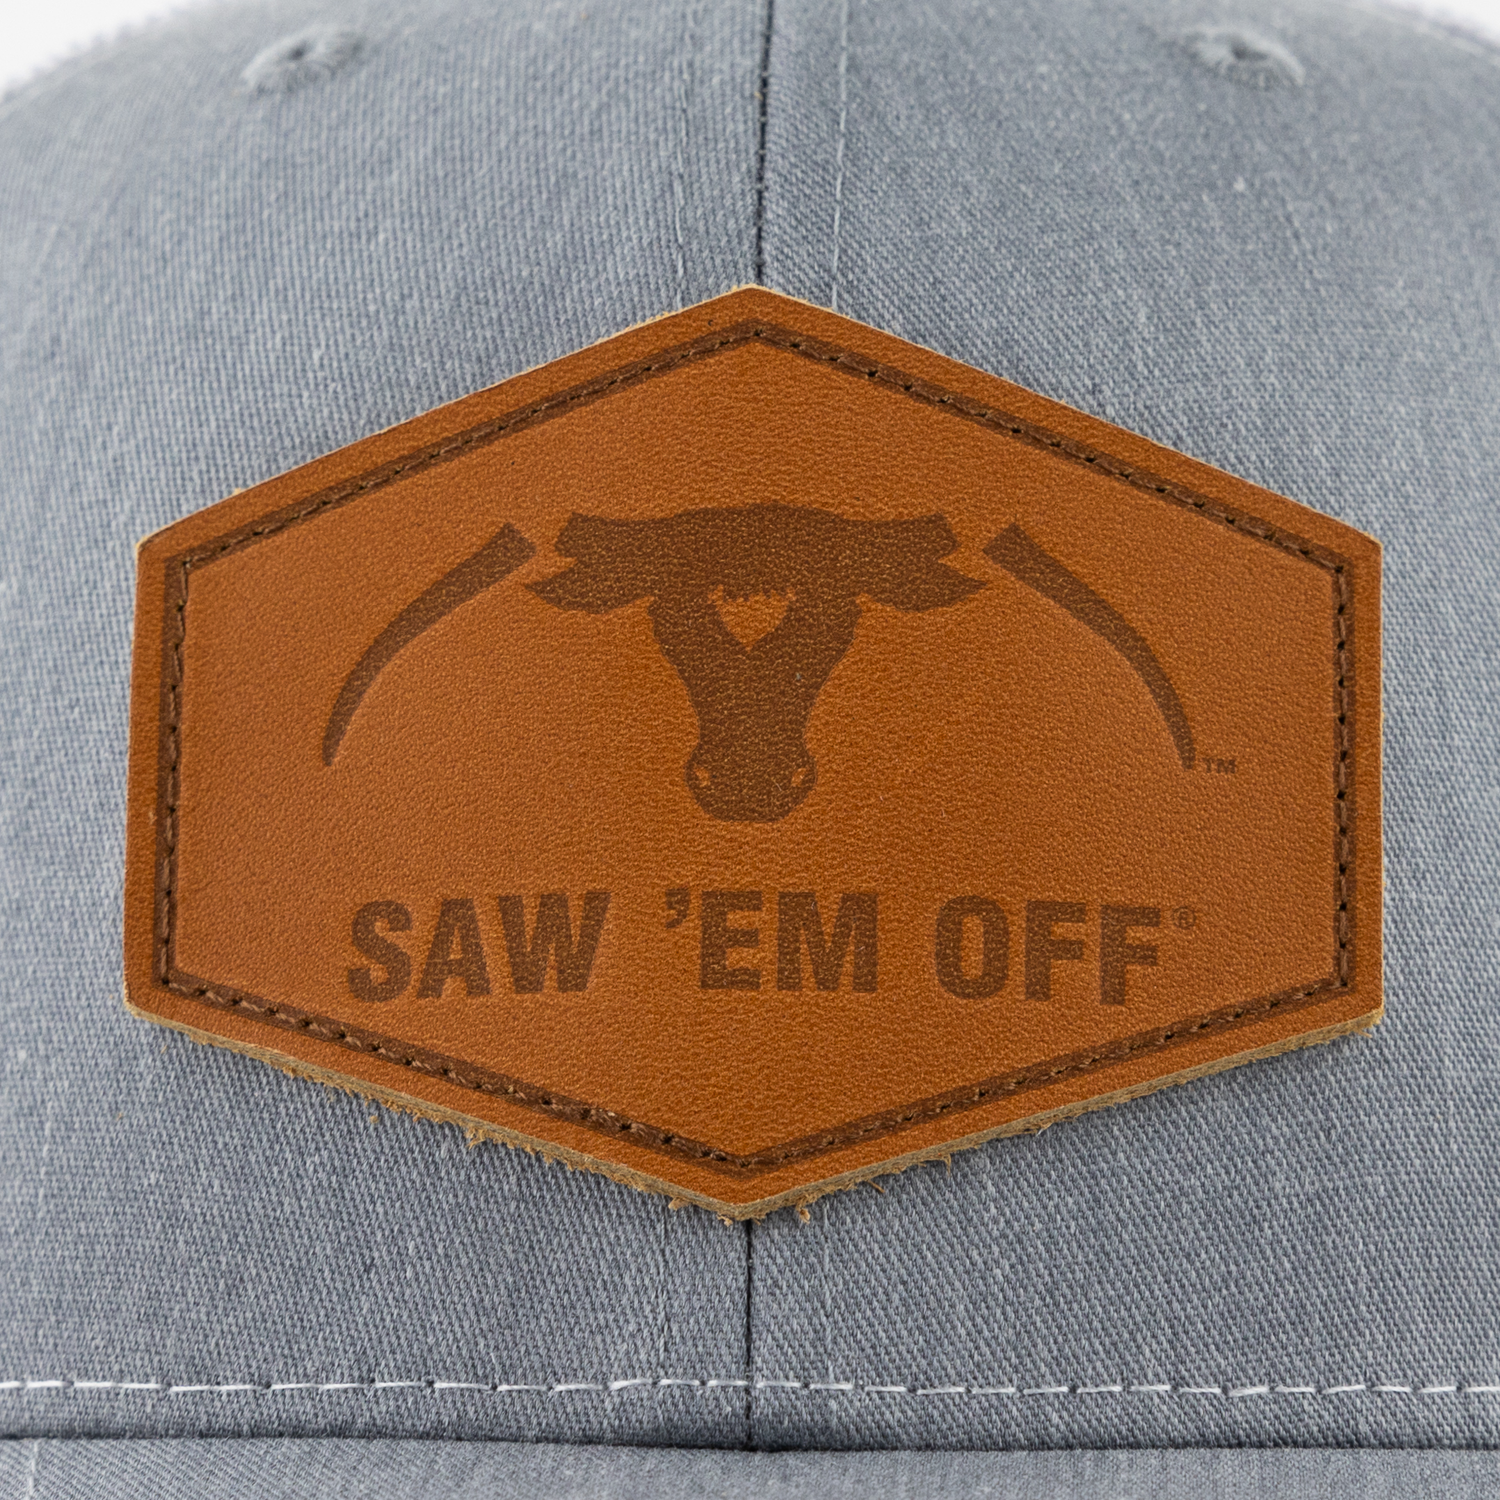 Saw 'Em Off Collegiate Outfitters Leather Patch Hat